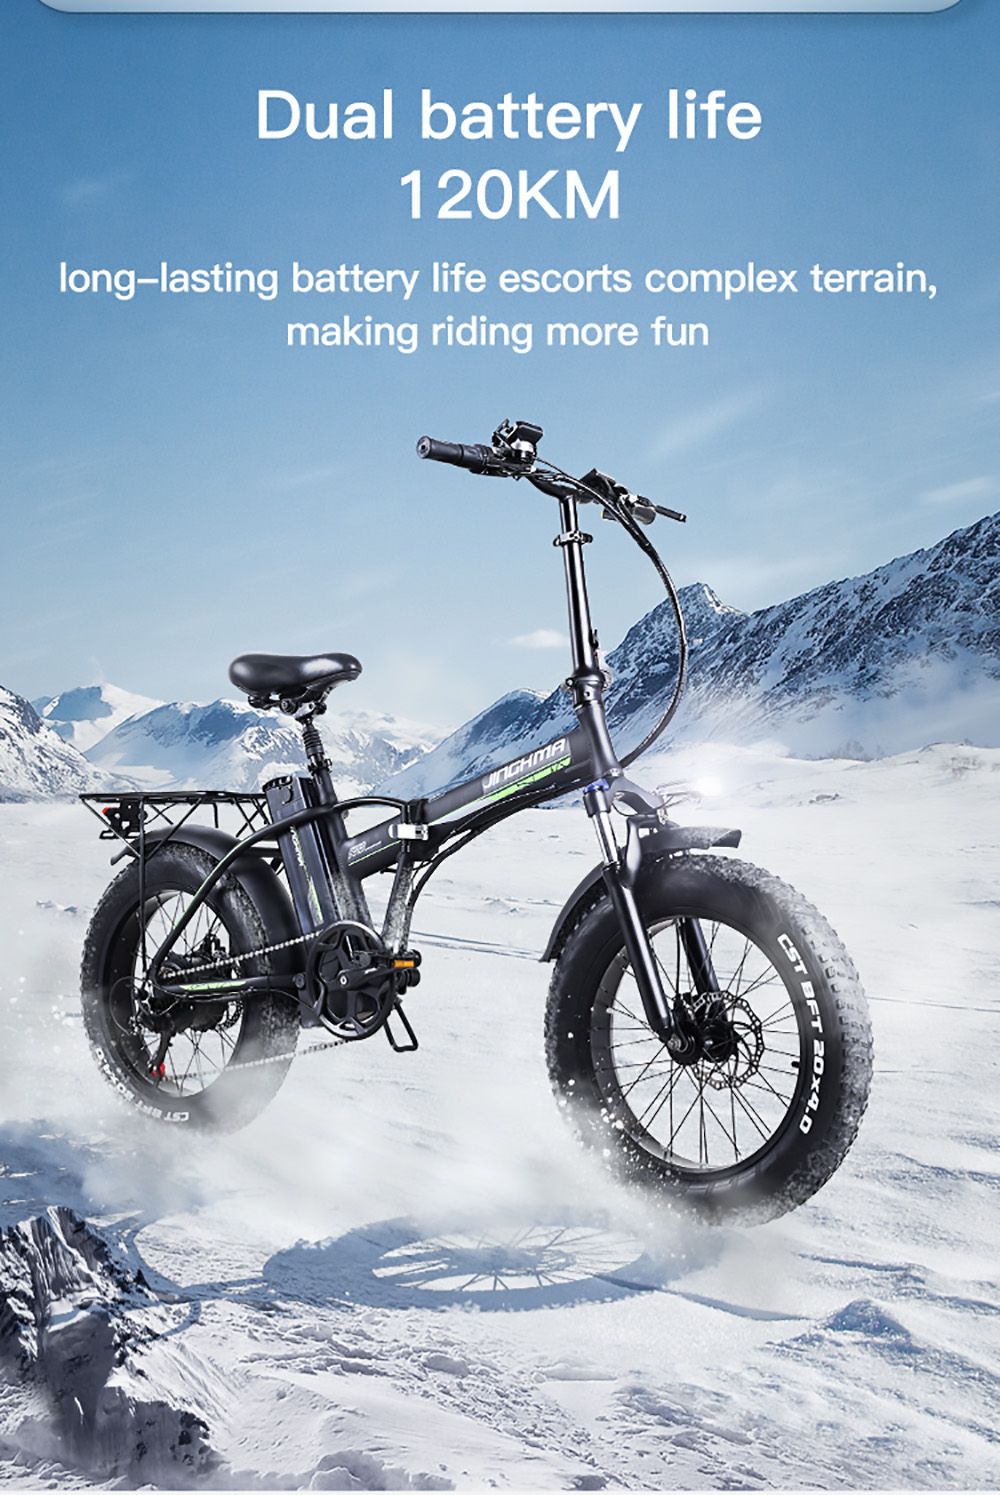 JINGHMA R8 500W 48V 15Ah 20 Inch Tire Electric Bicycle 40km/h Max Speed 90km Range 120kg Max Load